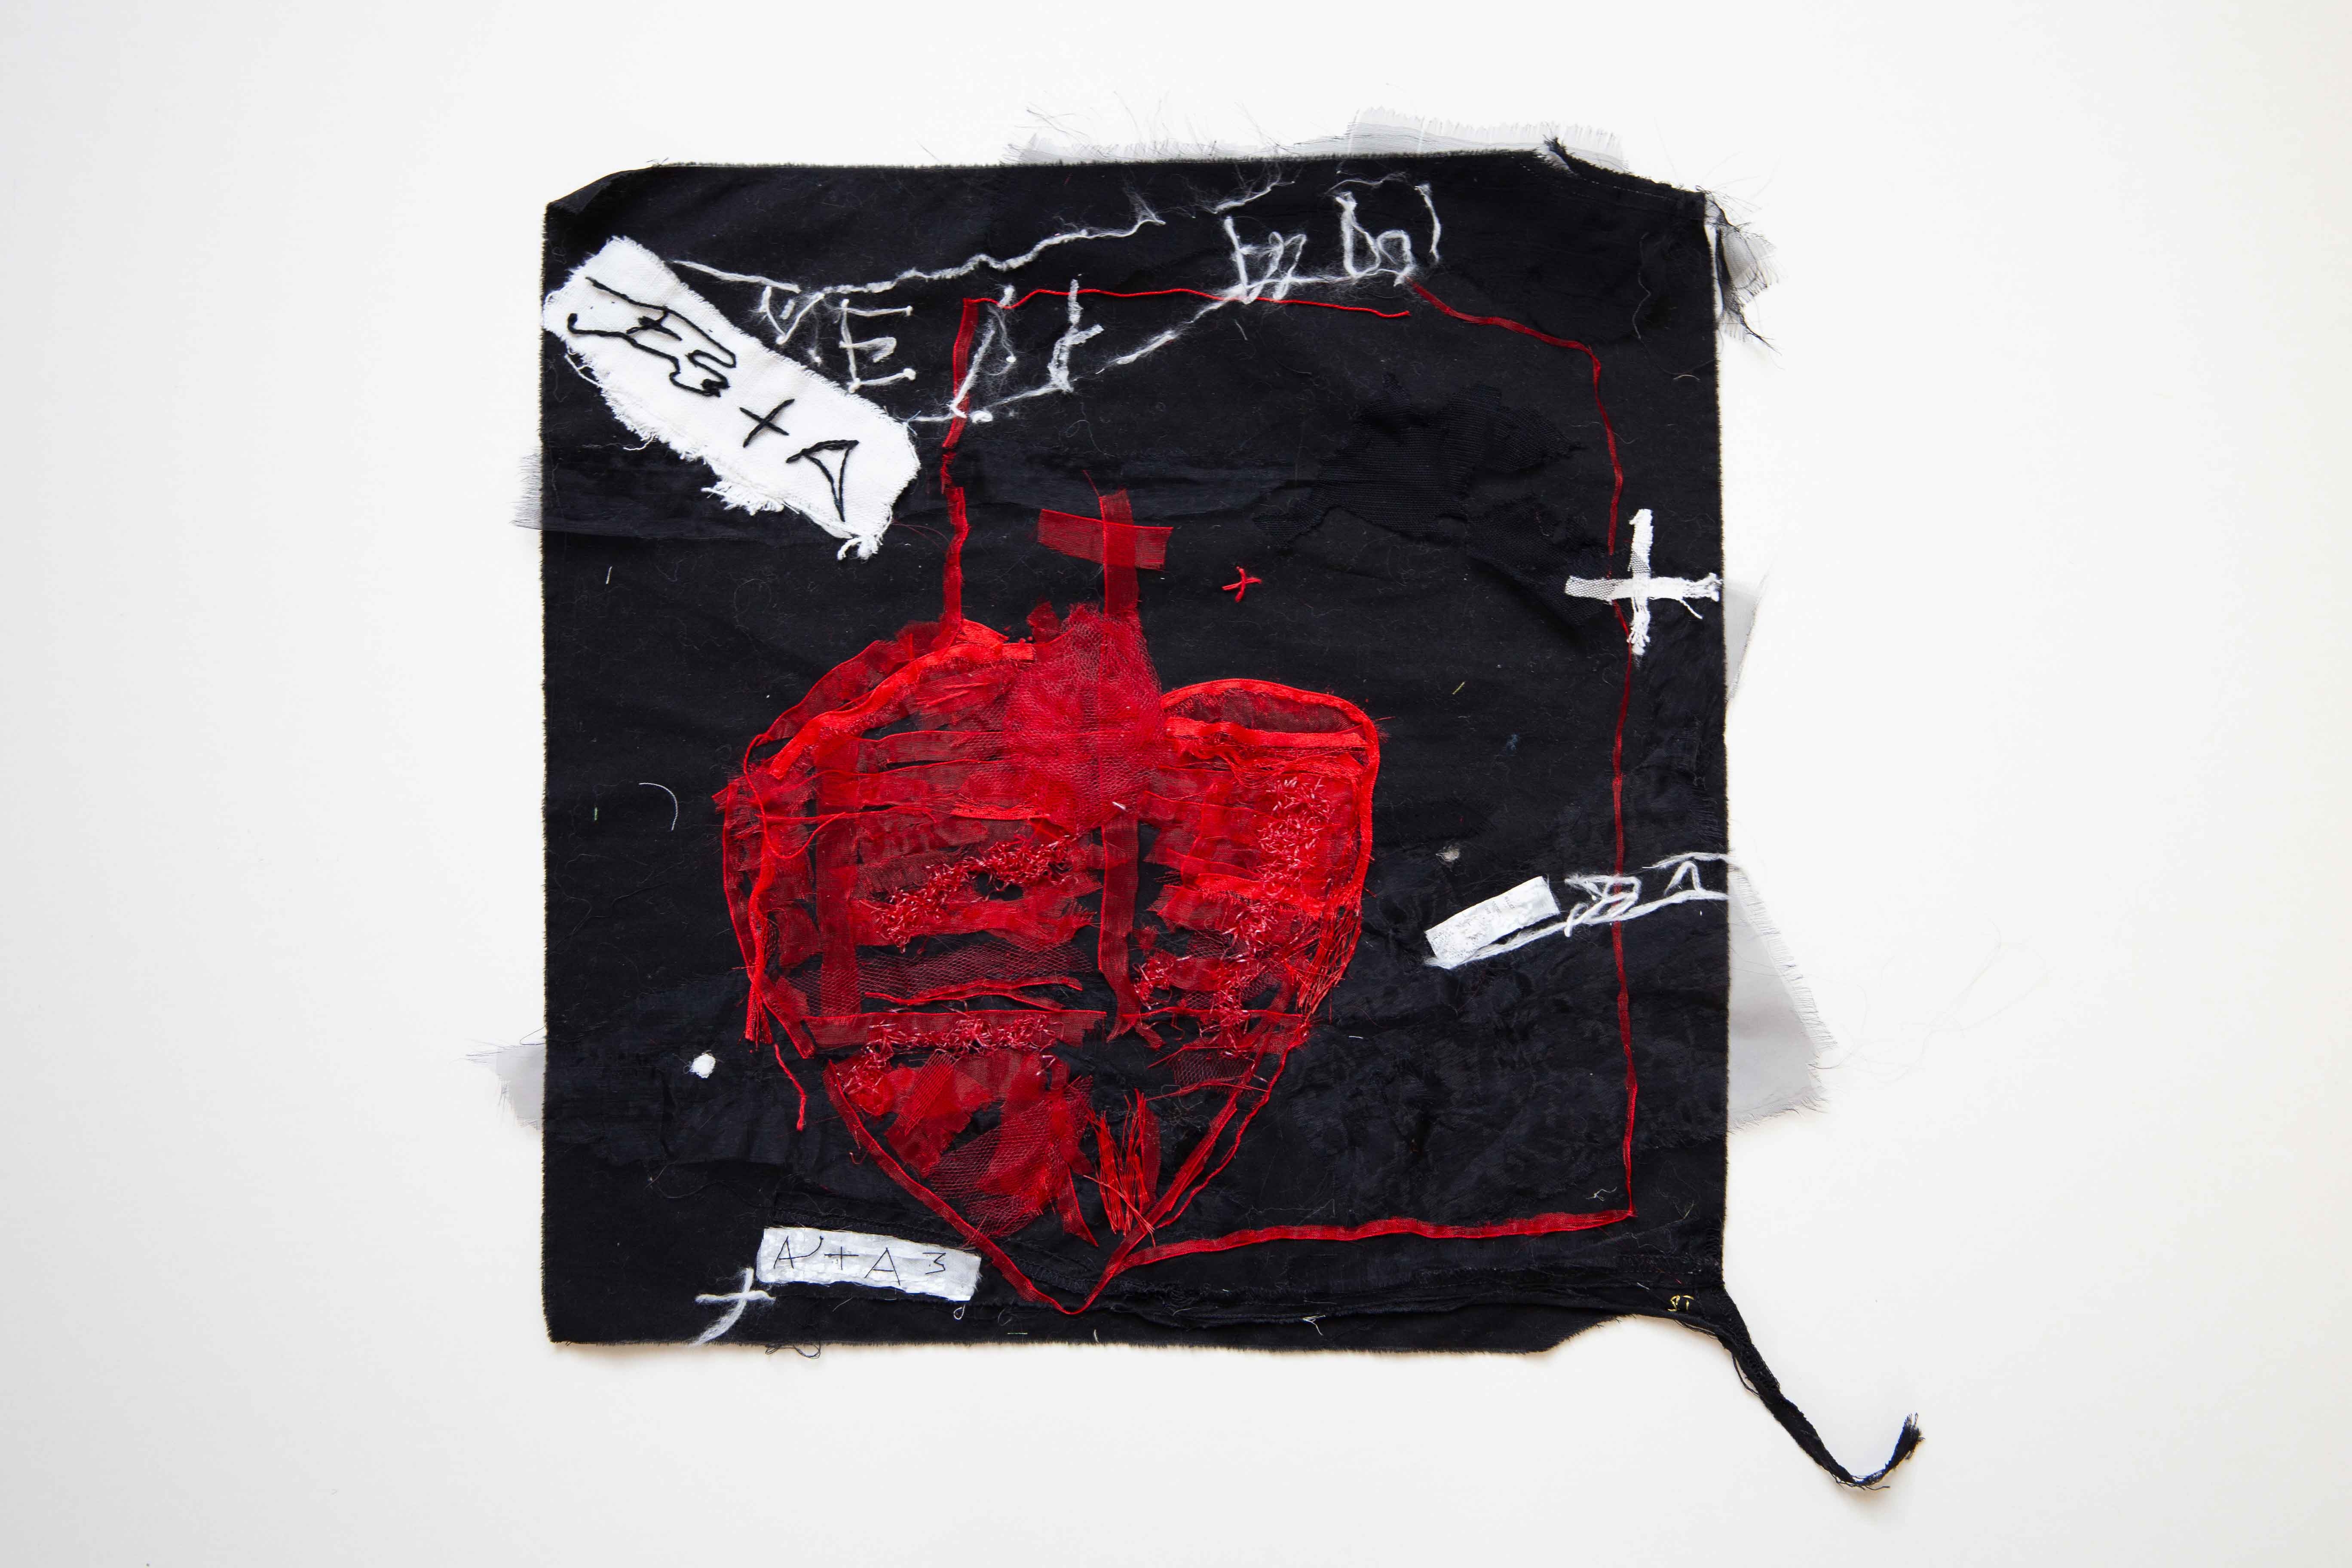 Tribute to Tapies - Coeur transi reste sourd